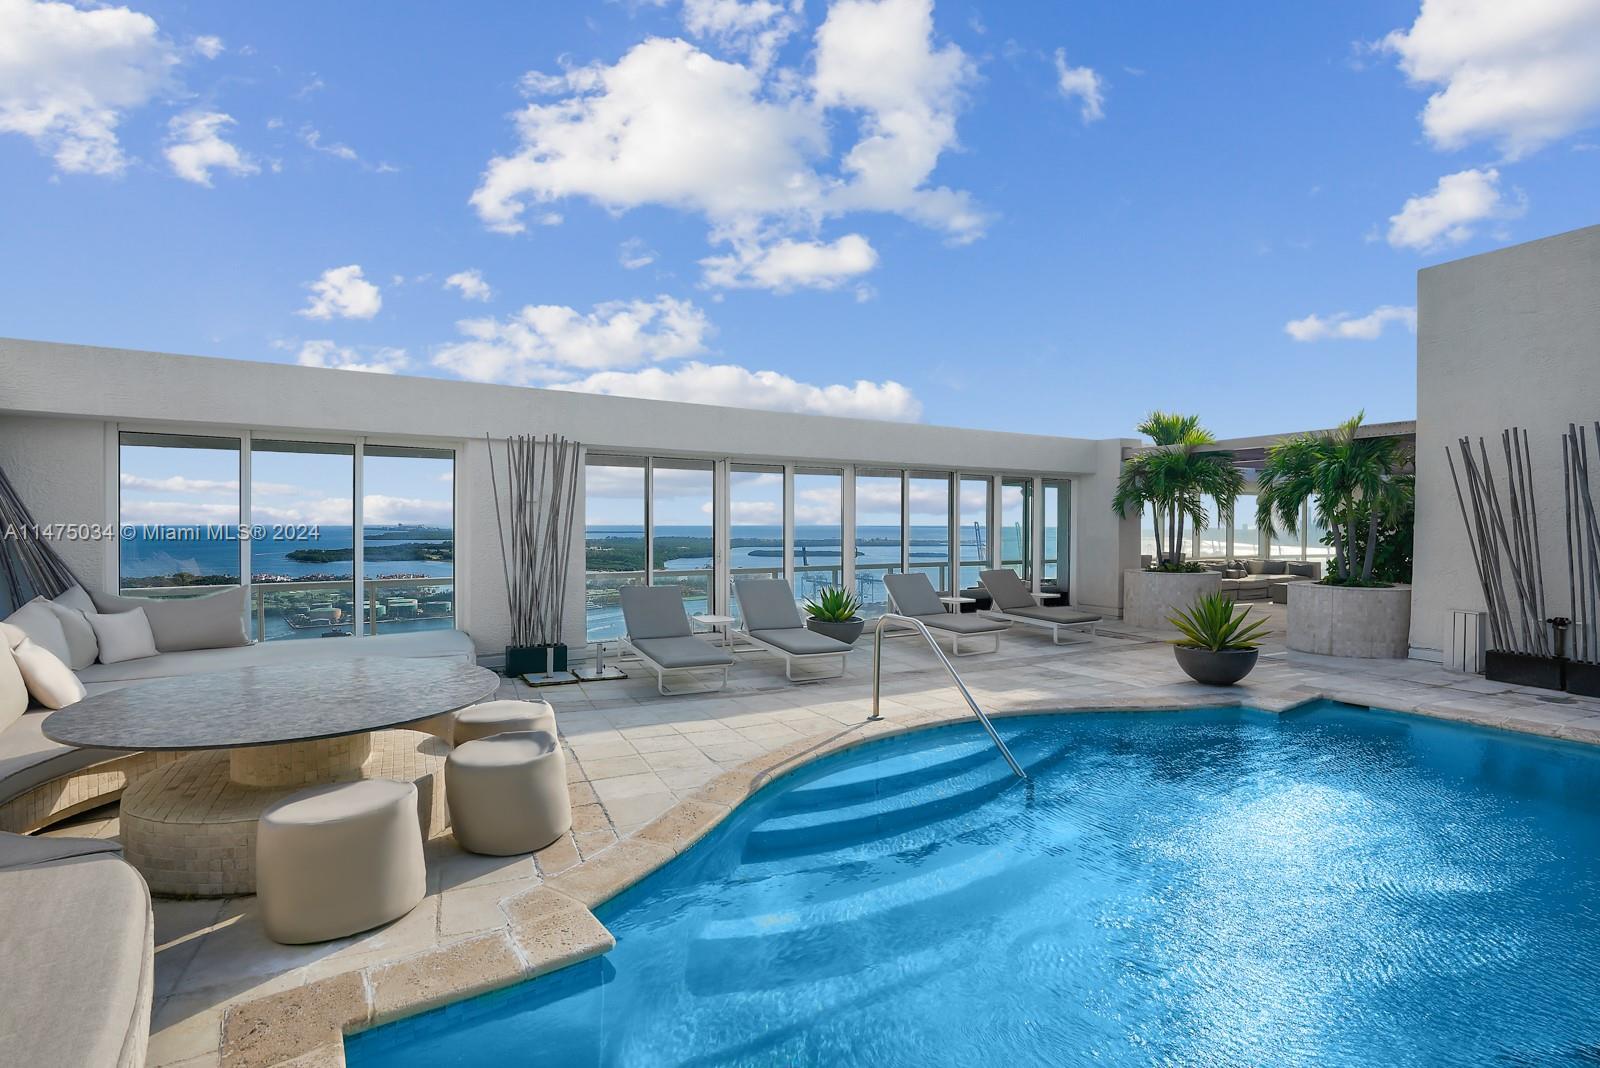 Don't miss this once-in-a-generation opportunity to own the pinnacle of South Beach luxury atop the 